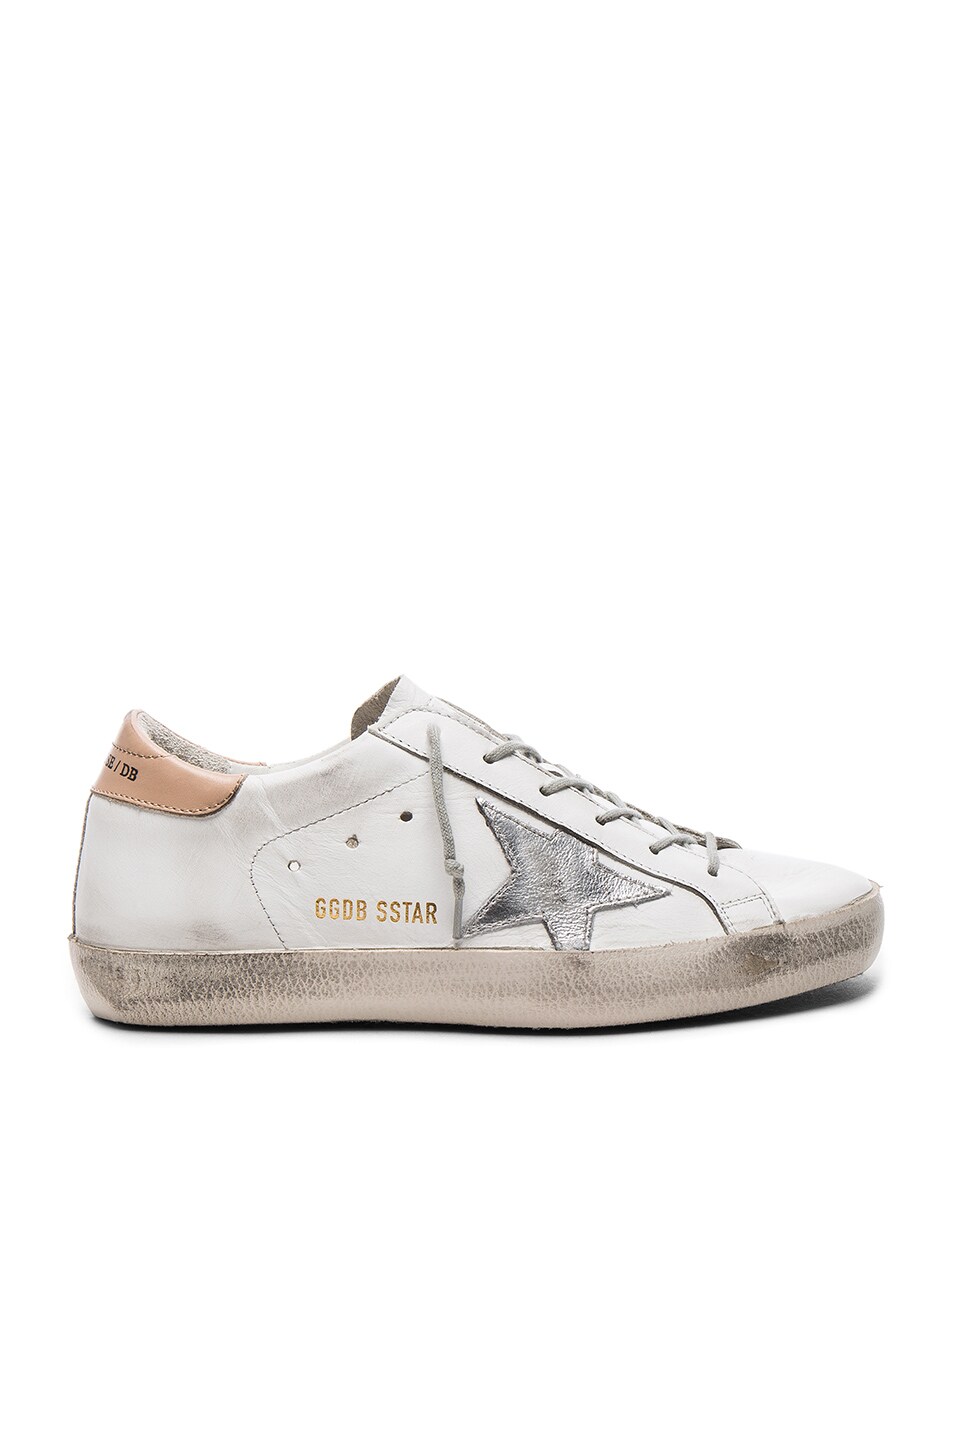 Image 1 of Golden Goose Leather Superstar Sneakers in Camel & White Leather